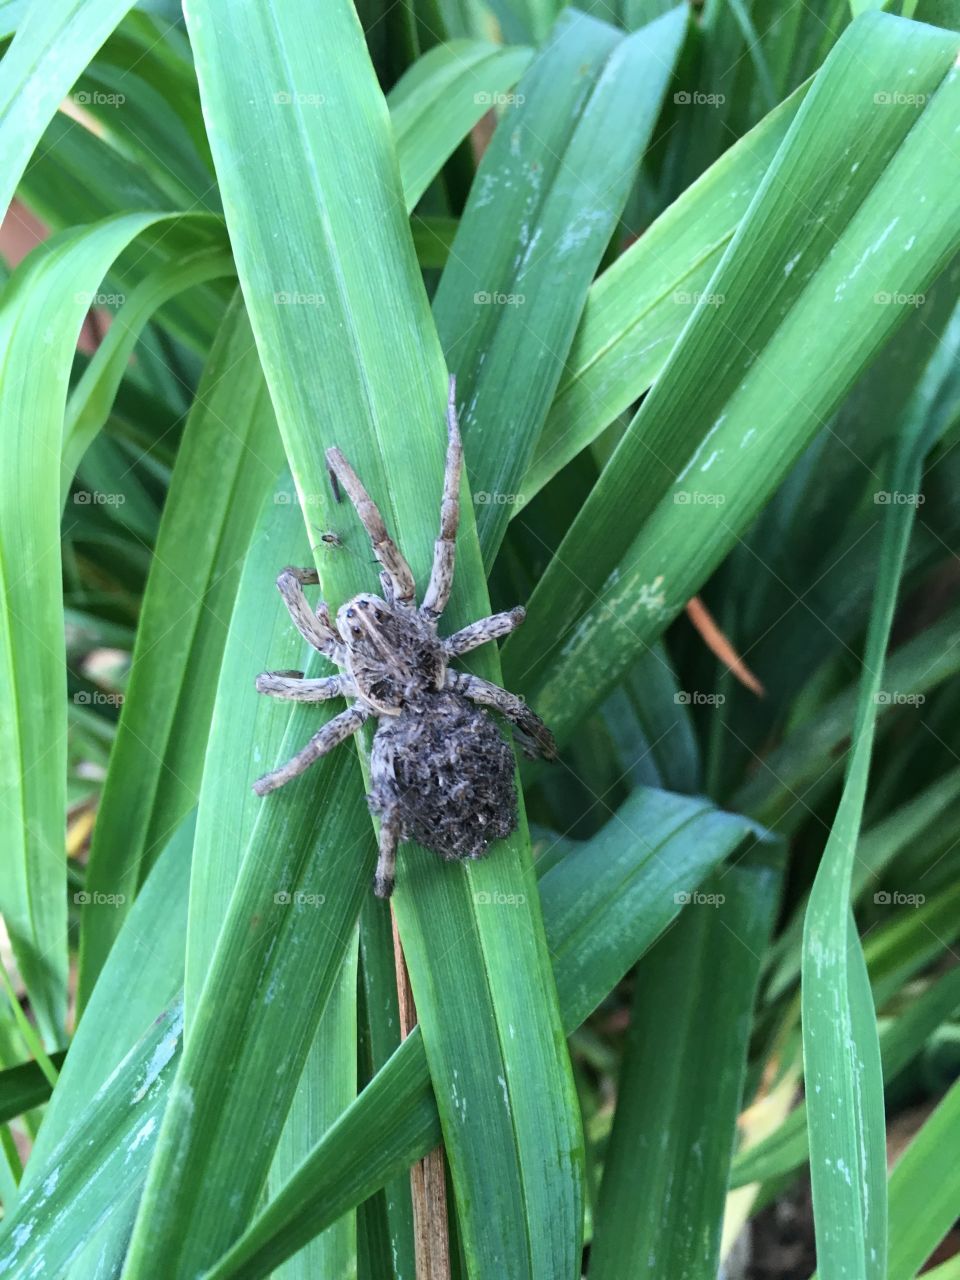 Wolf spider with babies on its back